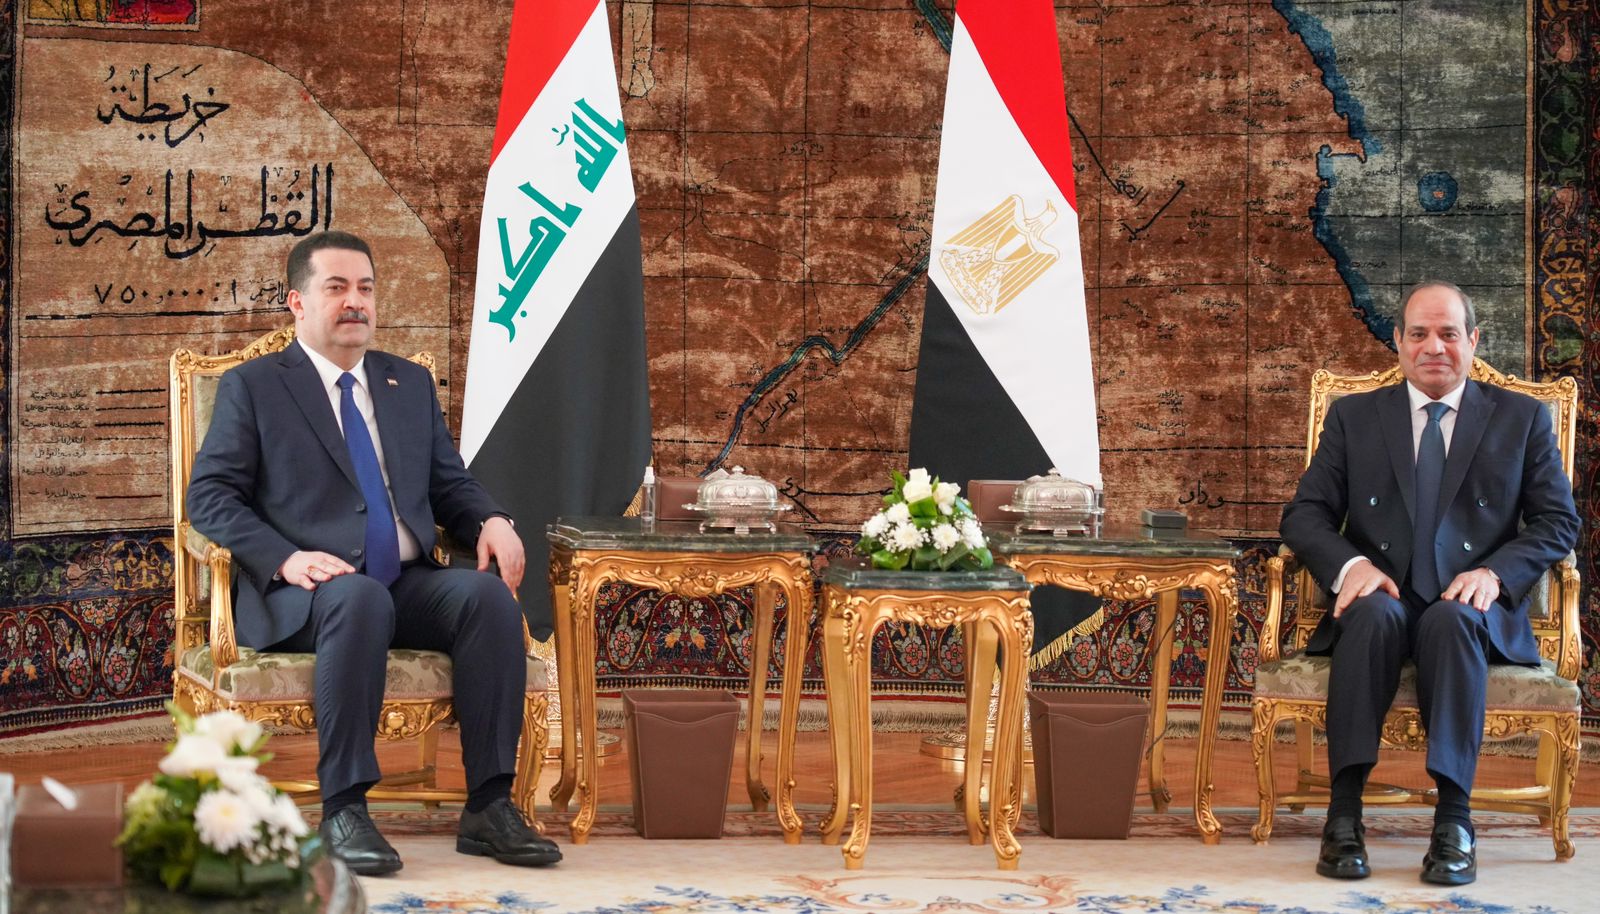 Iraqi Prime Minister Seeks Economic Cooperation on Second Official Visit to Egypt